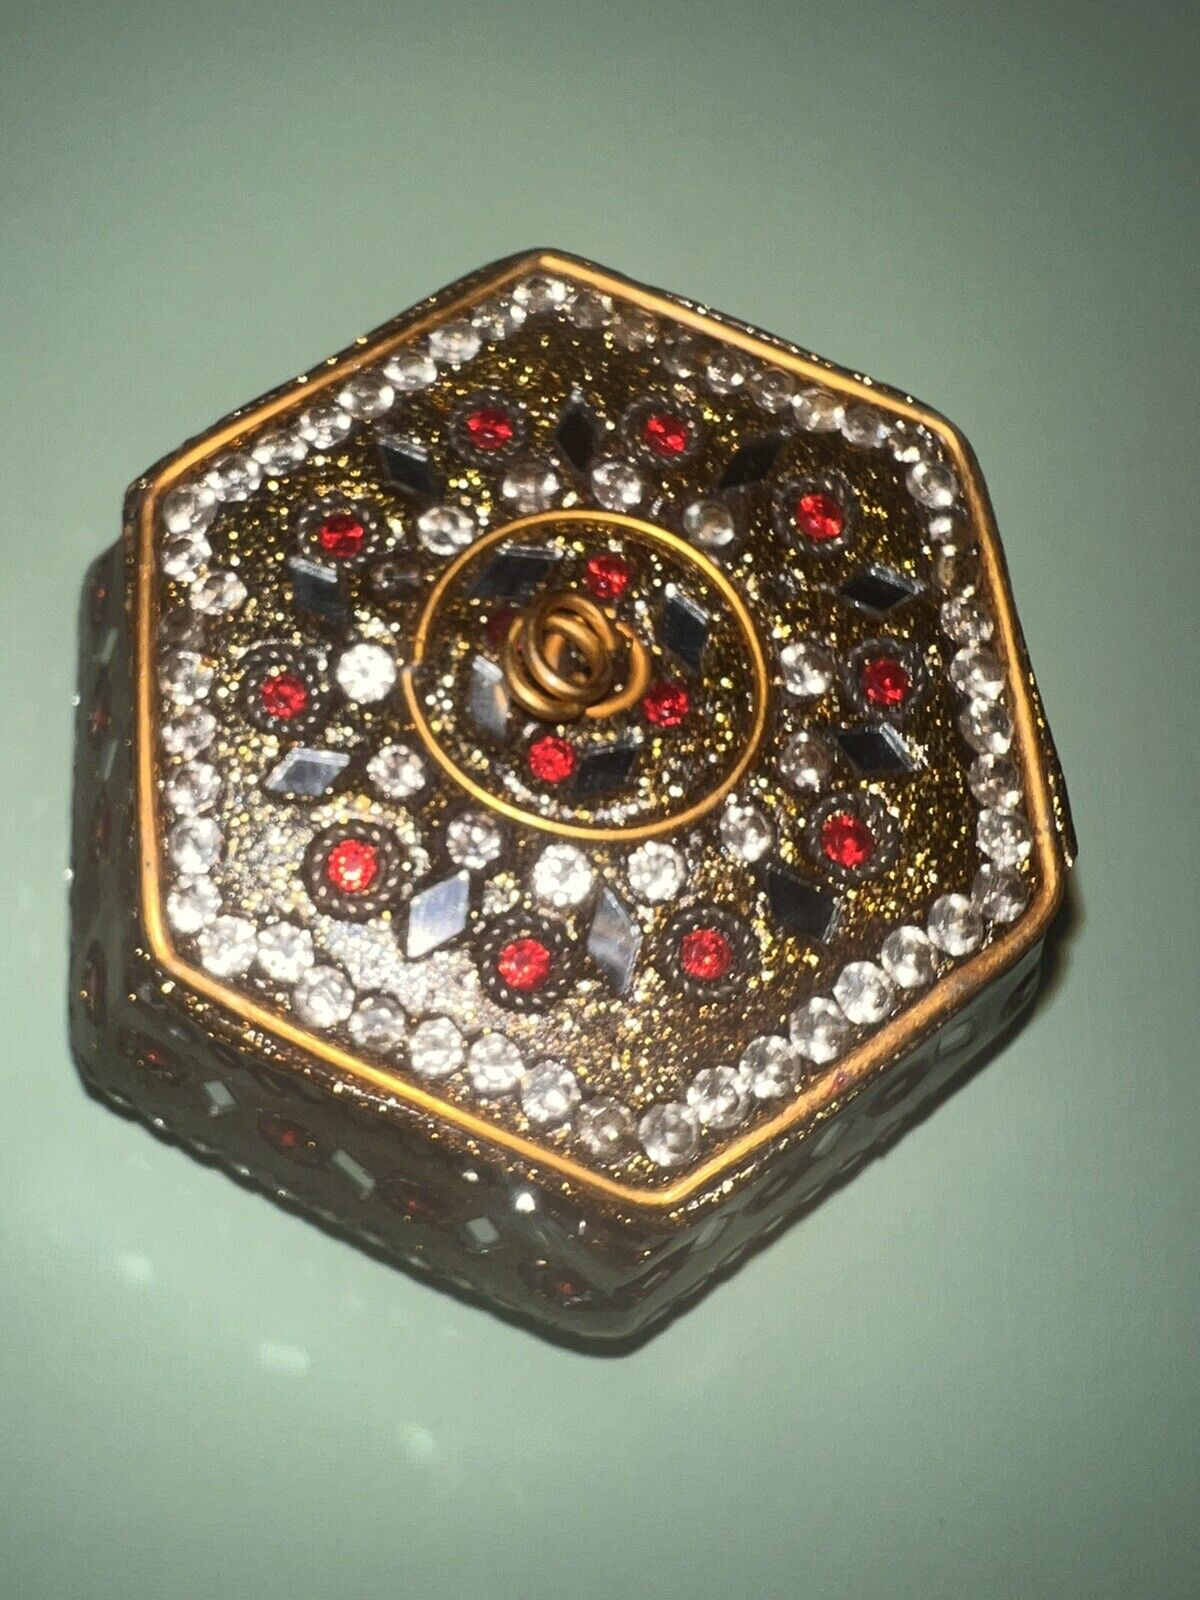 Vintage Jeweled & Mirrored Trinket Box With Brass Accents Octagonal Shape